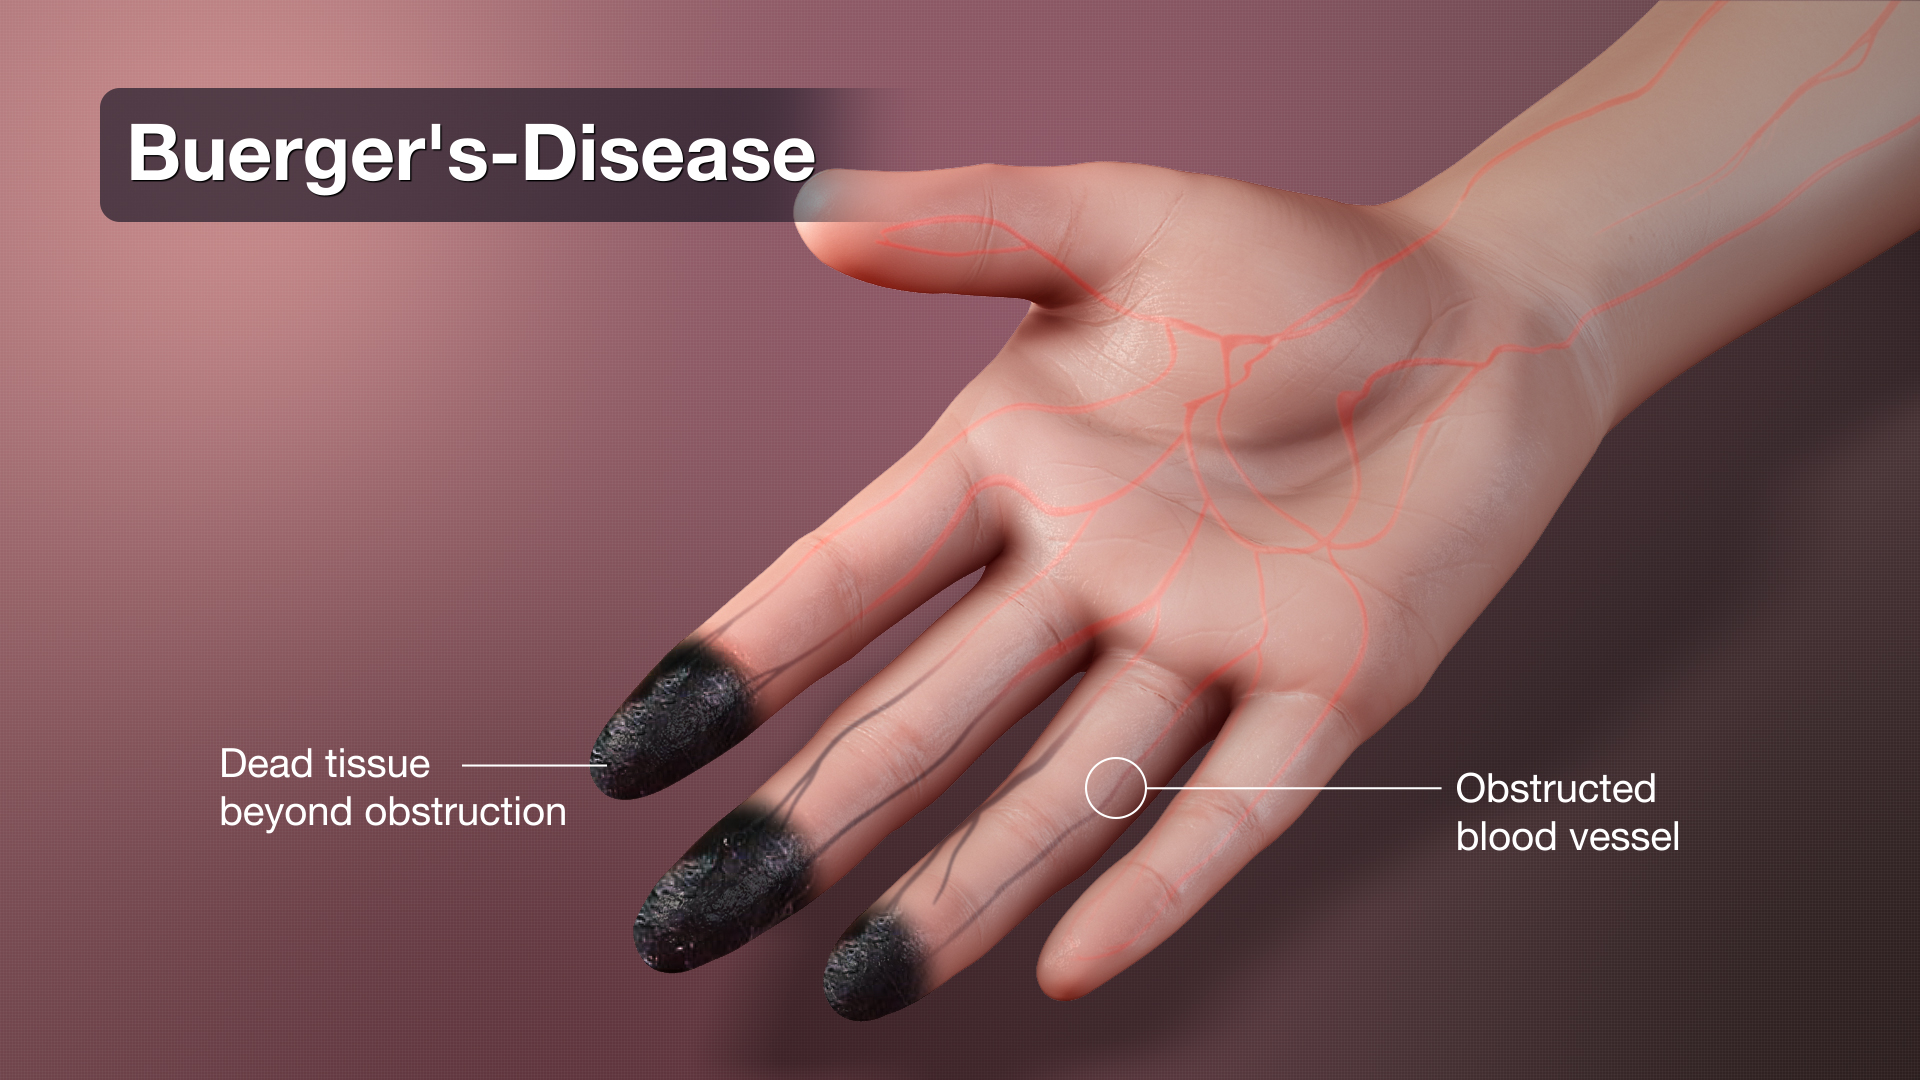 3D Medical Animation Showing Buerger's Disease